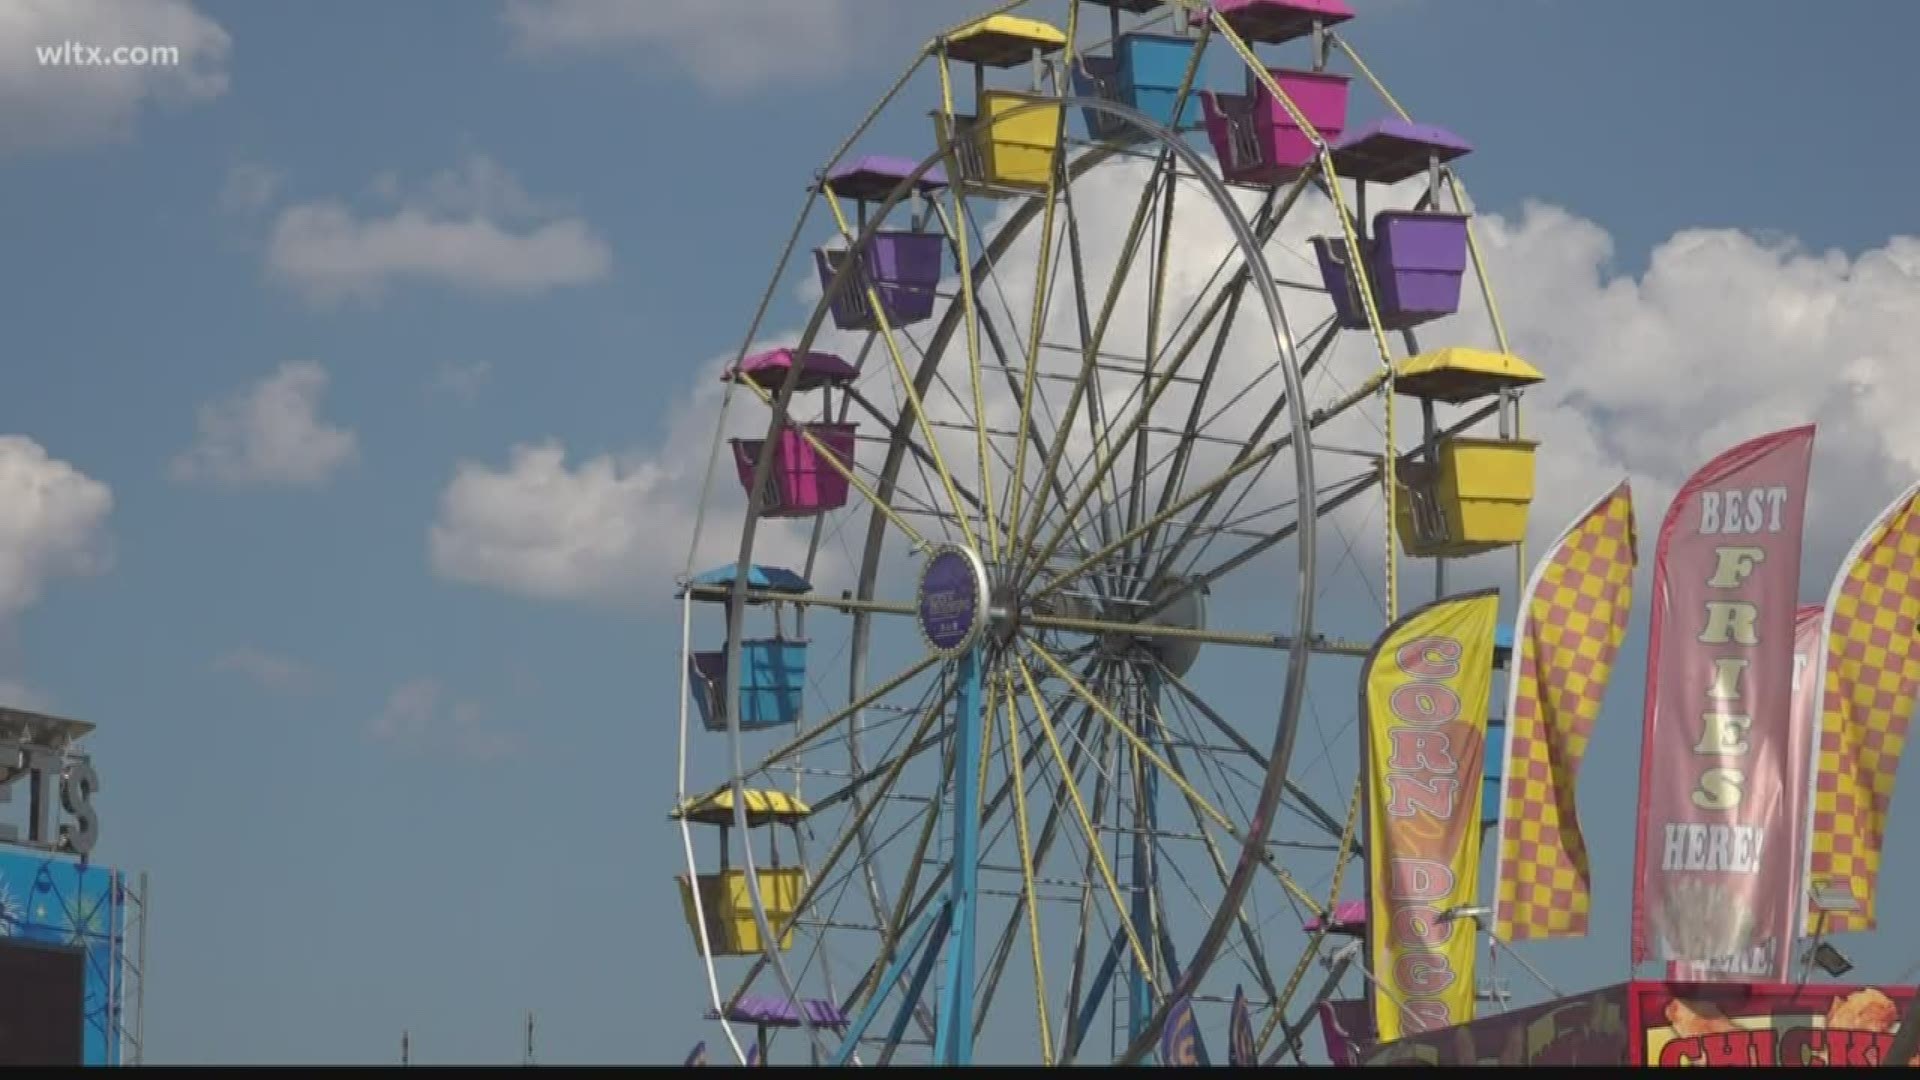 The annual Orangeburg County Fair in South Carolina is bringing back a few of its favorites as well as a few new attractions.